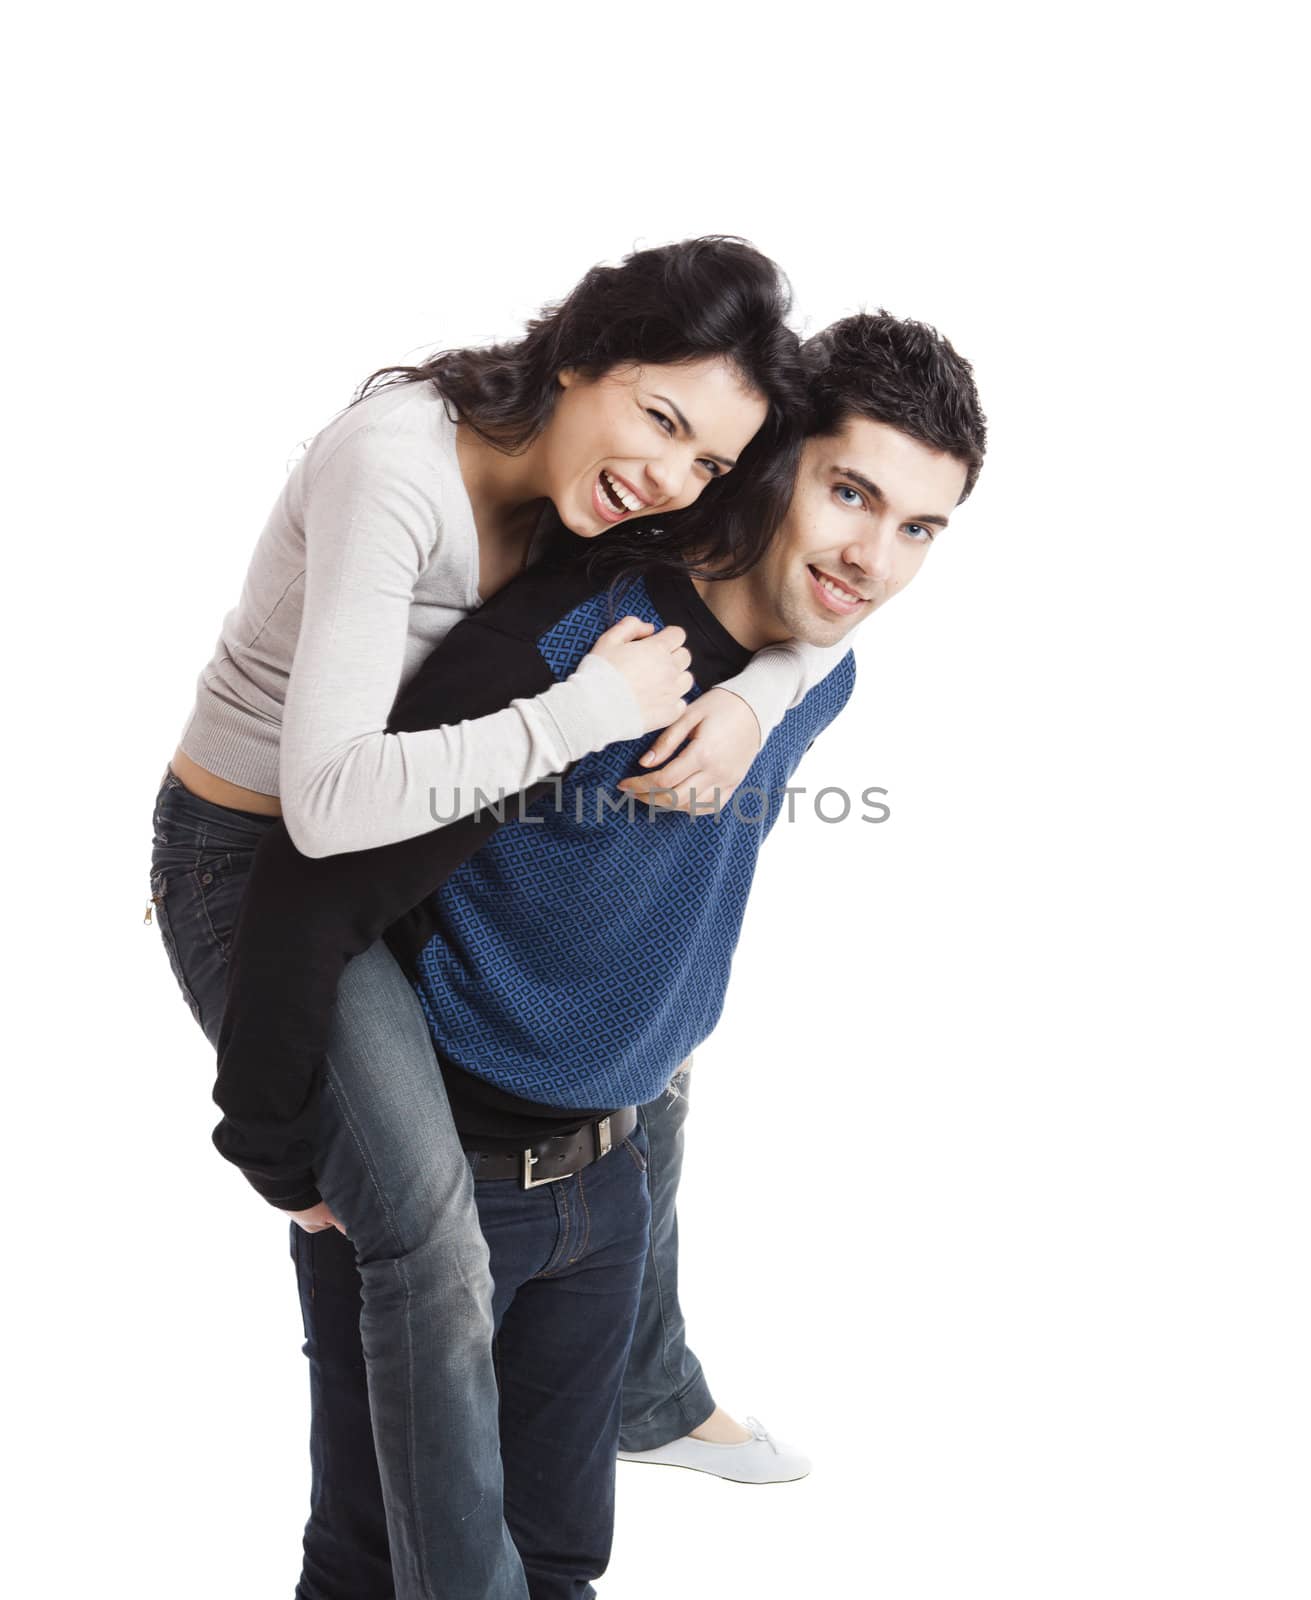 Attractive and happy young couple isolated over a white background